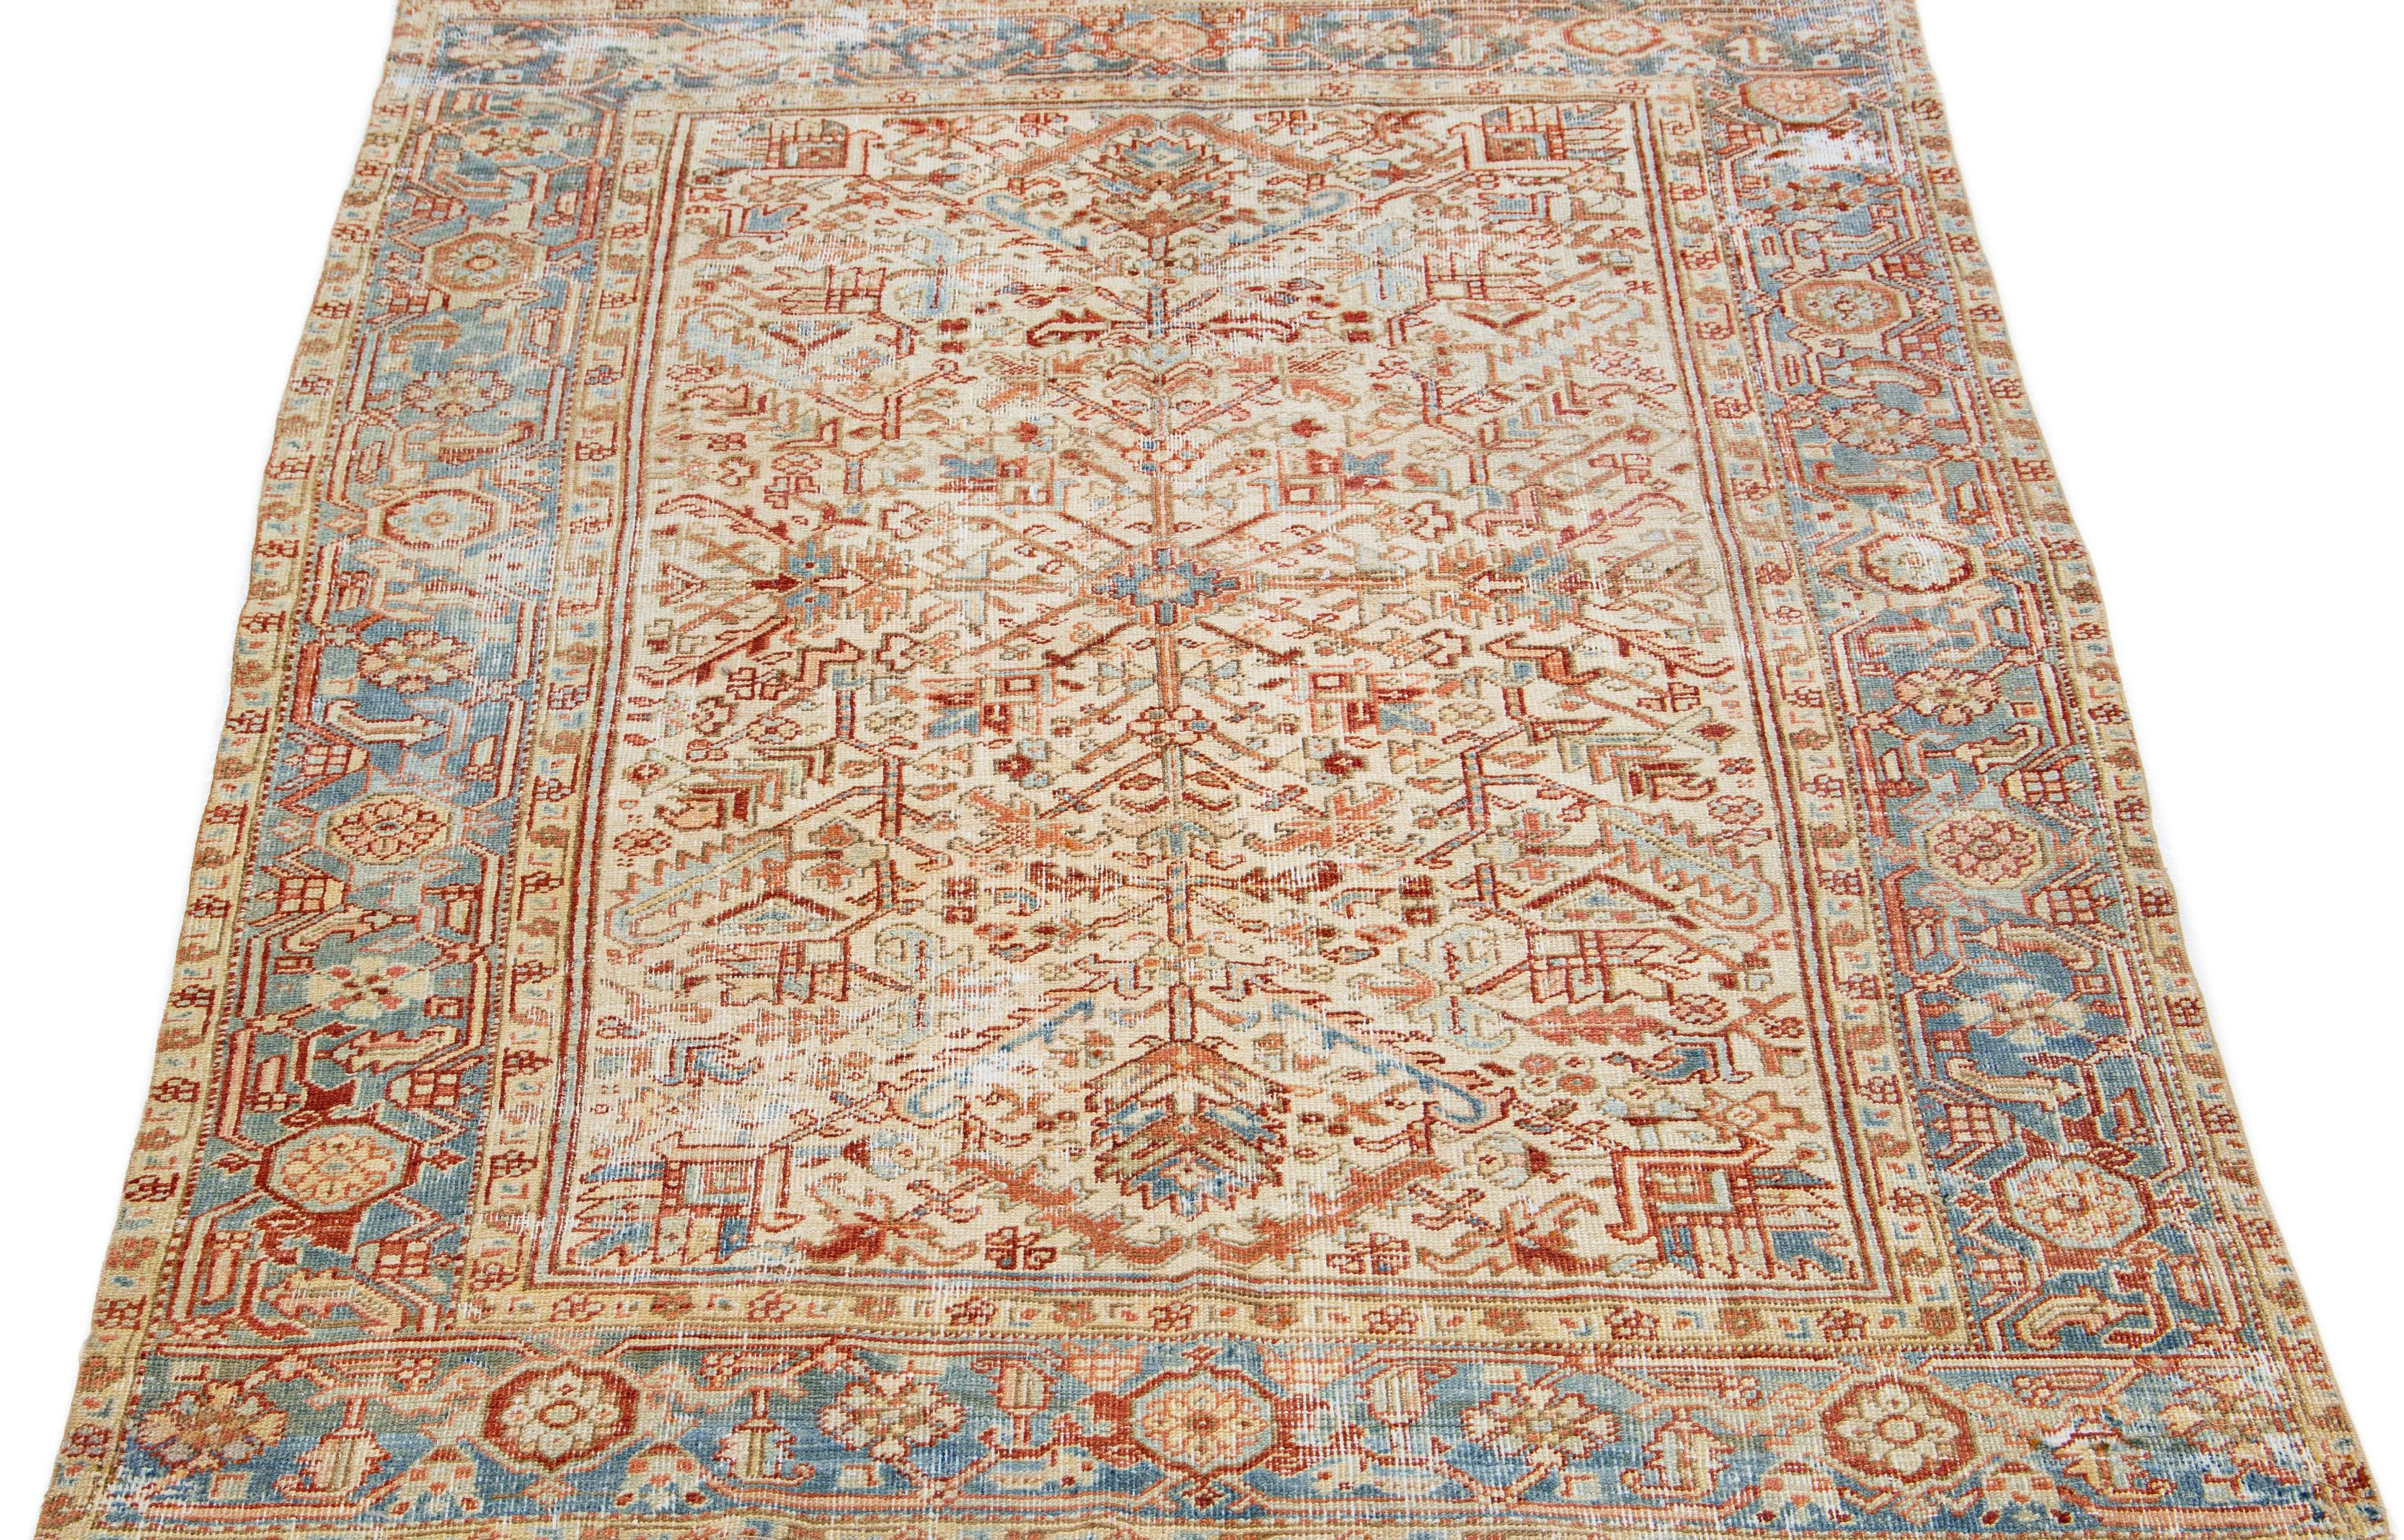 The antique Heriz rug exudes timeless elegance and sophistication with its premium hand-knotted wool and striking all-over design. The eye-catching geometric floral pattern in shades of blue and rust adds a touch of allure to the soft beige field,